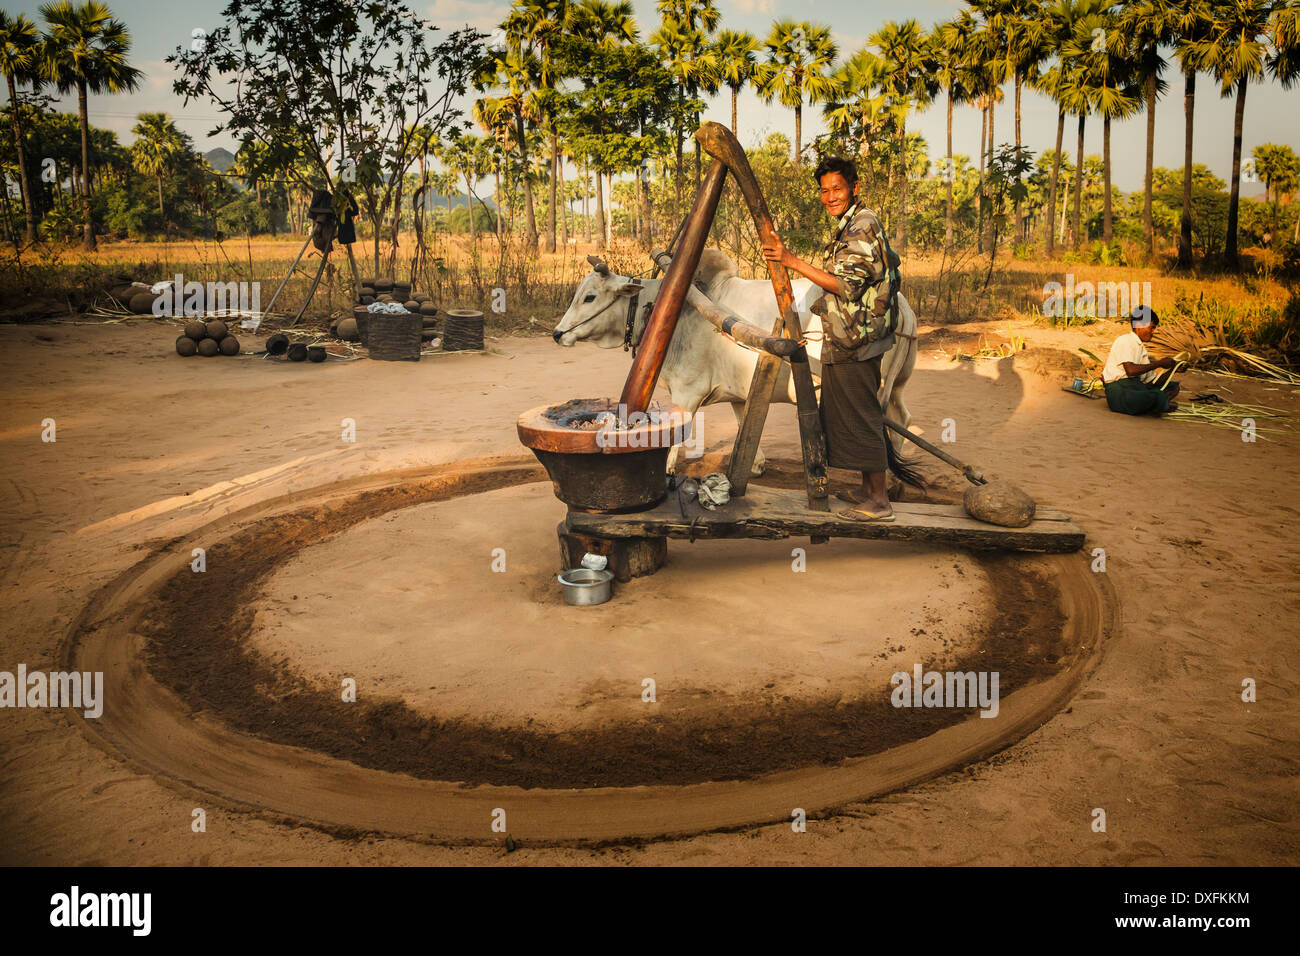 Myanmar (Burma), Mandalay Division, Bagan, the process of pressing oil out of the palm nuts Stock Photo